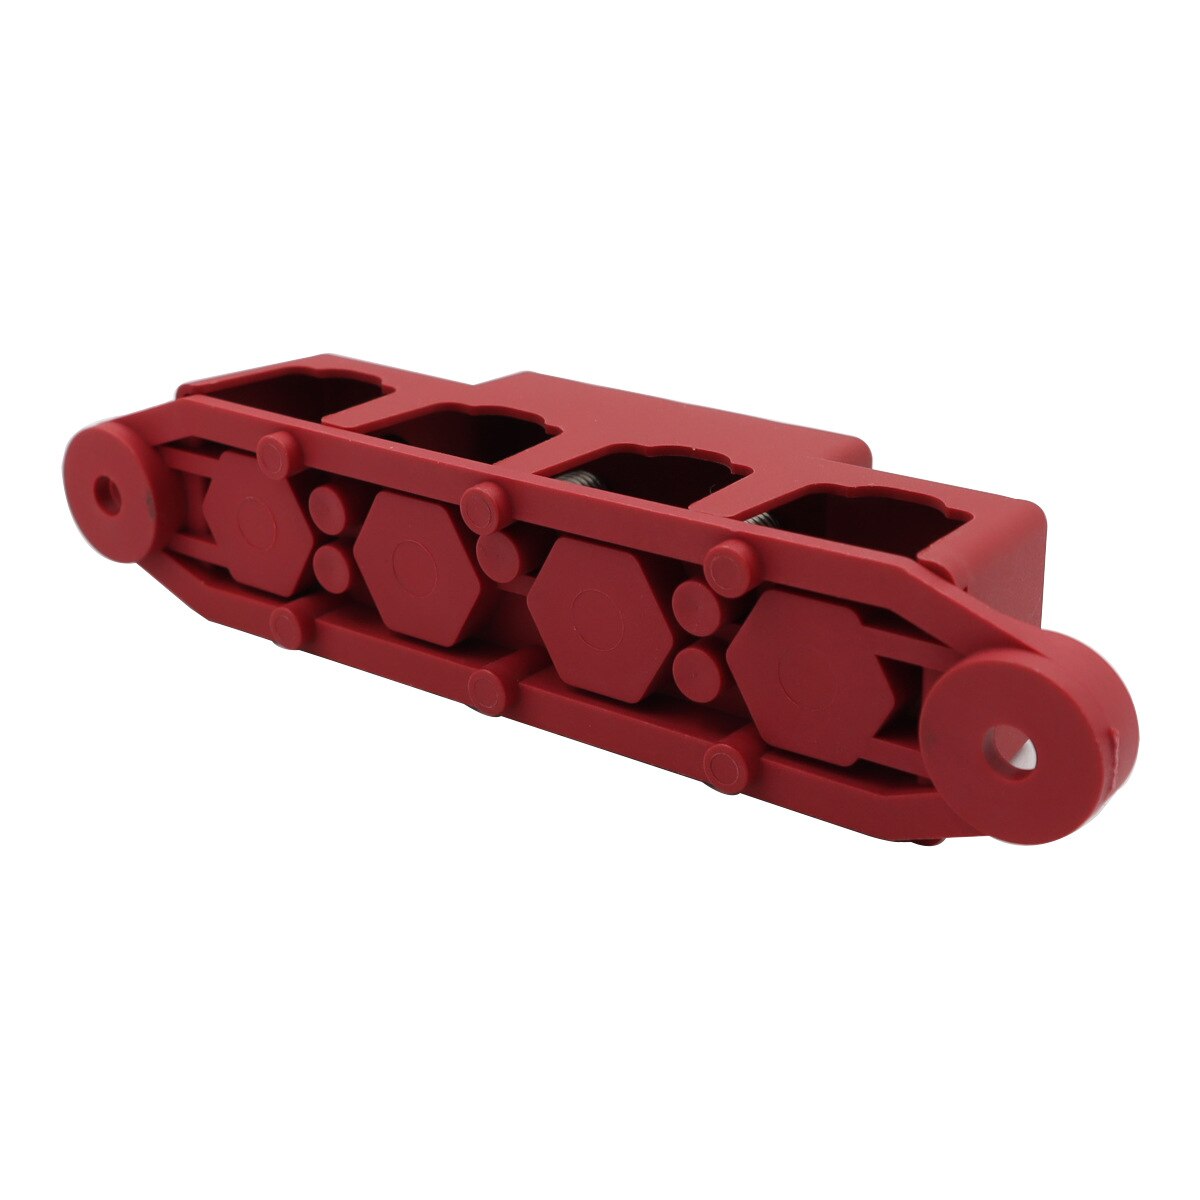 M8 M10 Cover Ground Distribution Block 150A 48V Rating - Car Boat Marine Power Distribution Terminal Block